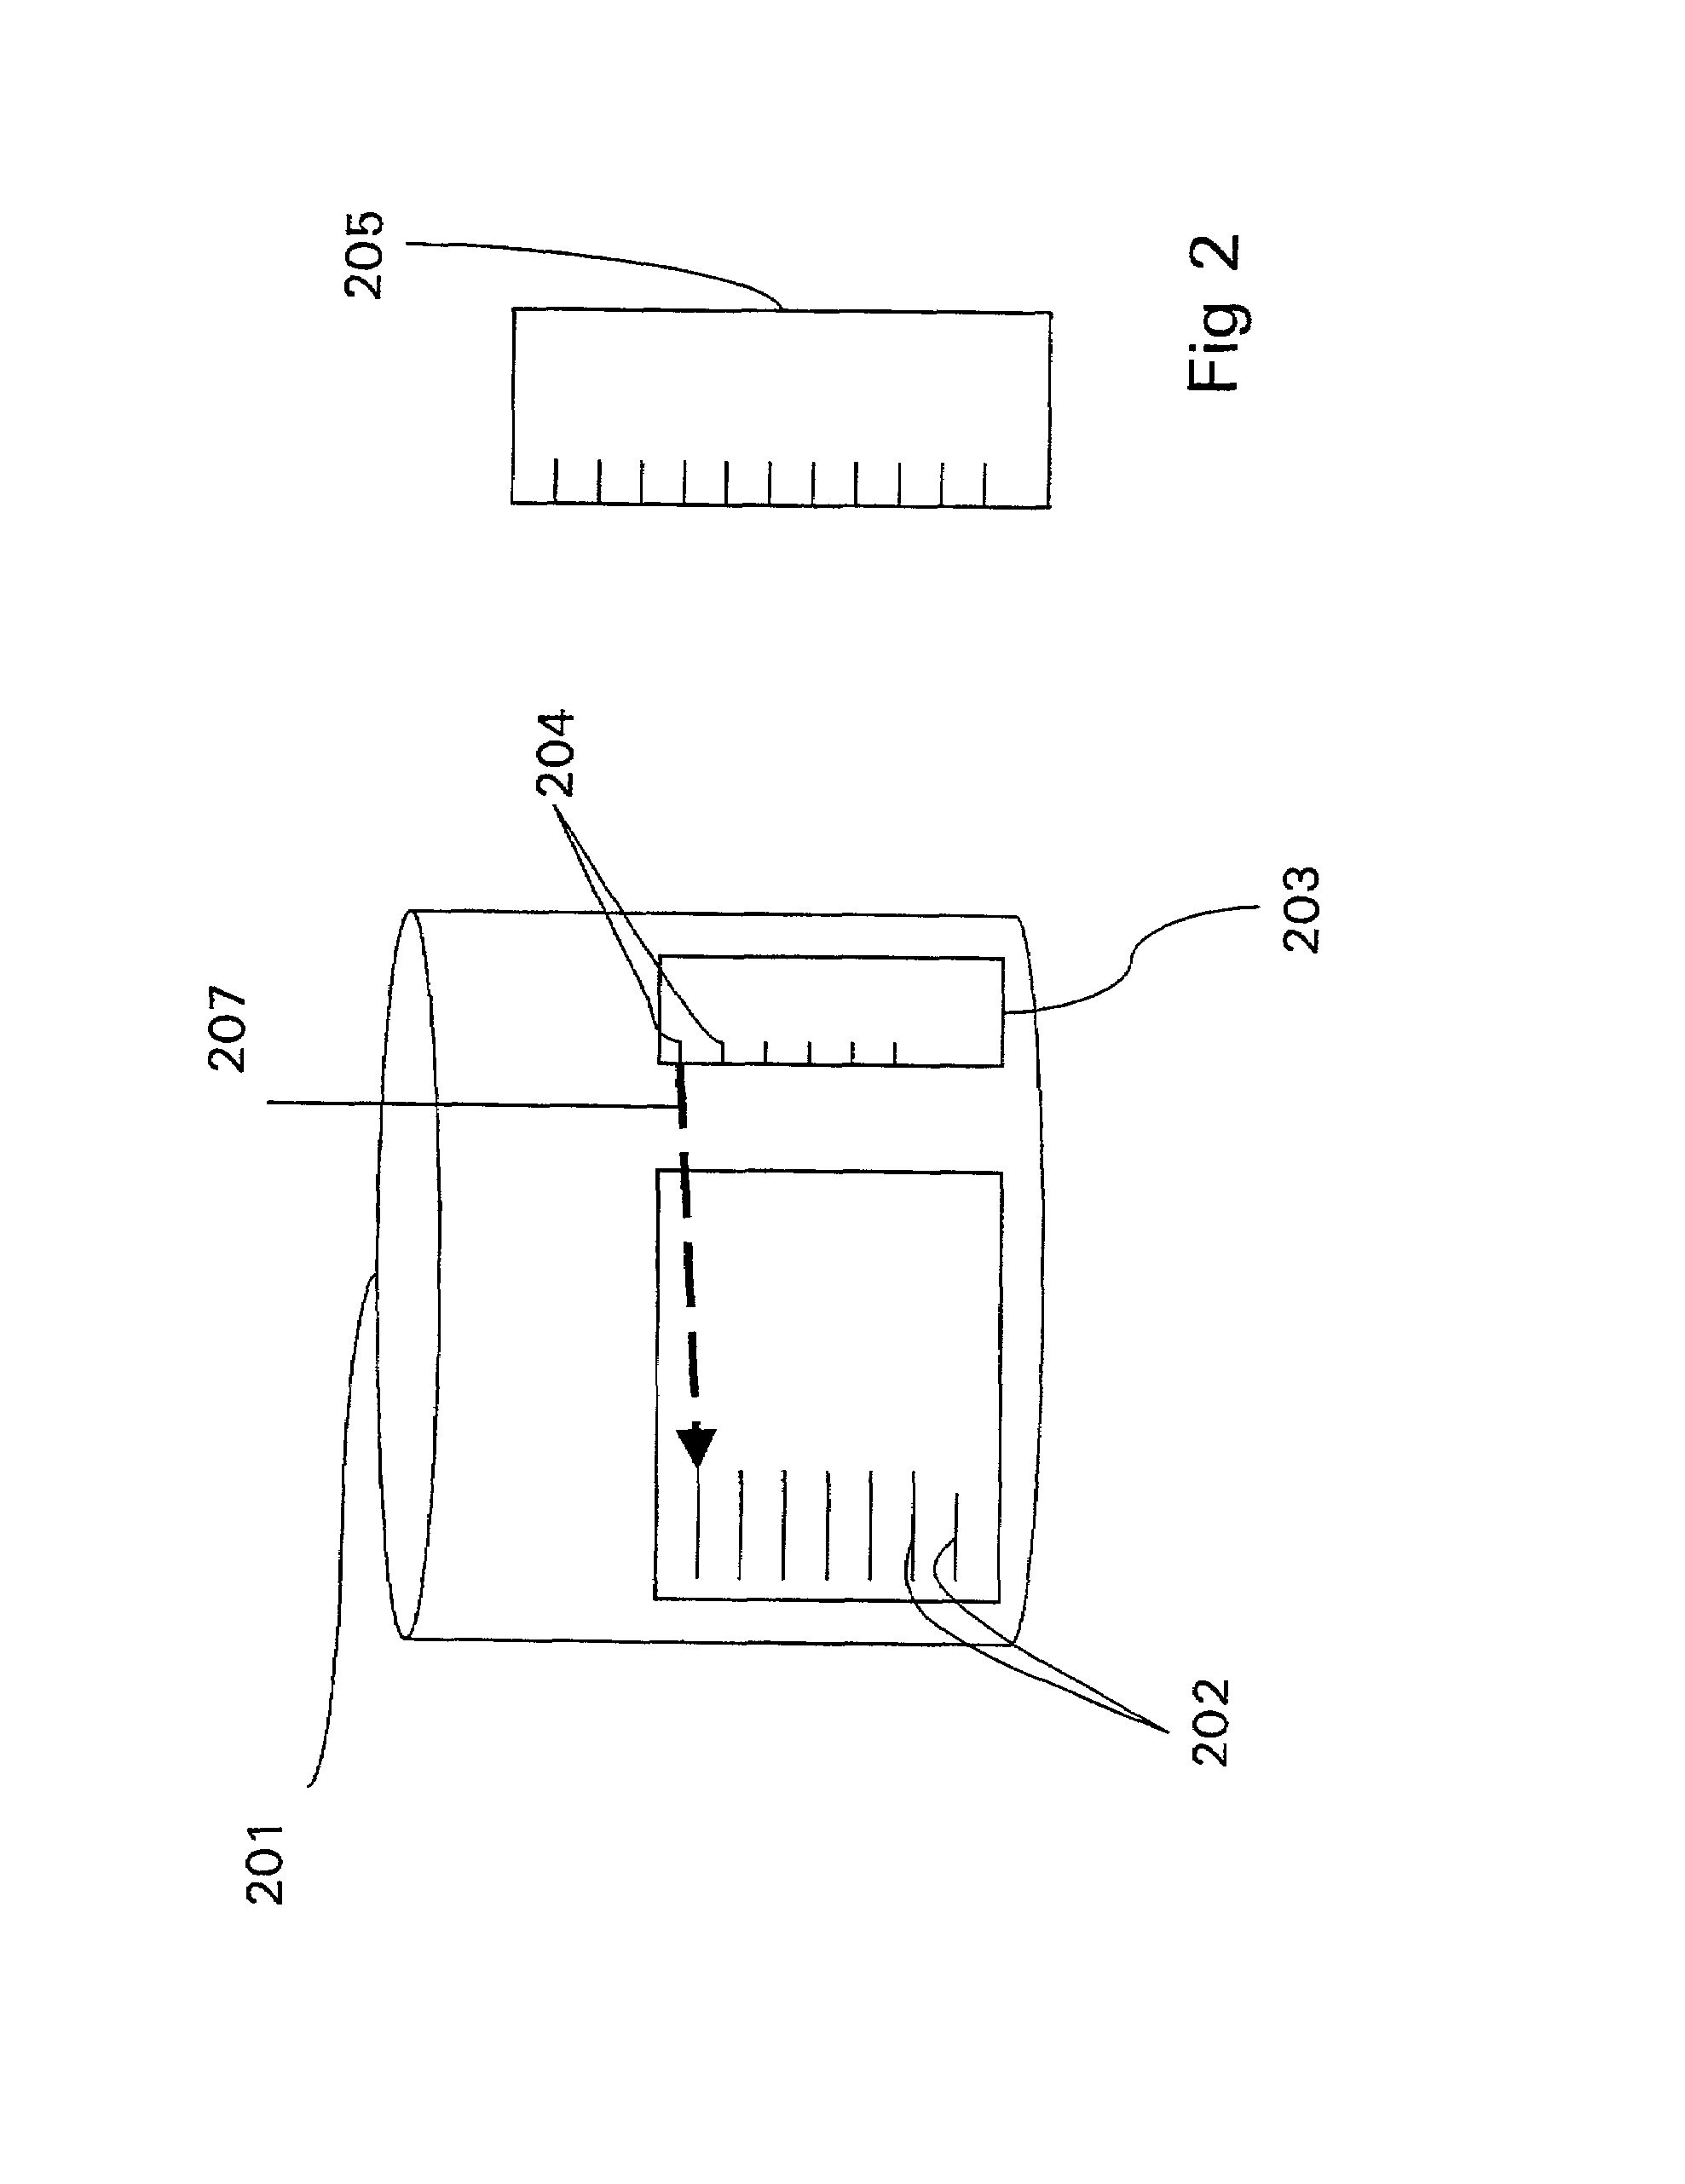 Method and apparatus for processing queries